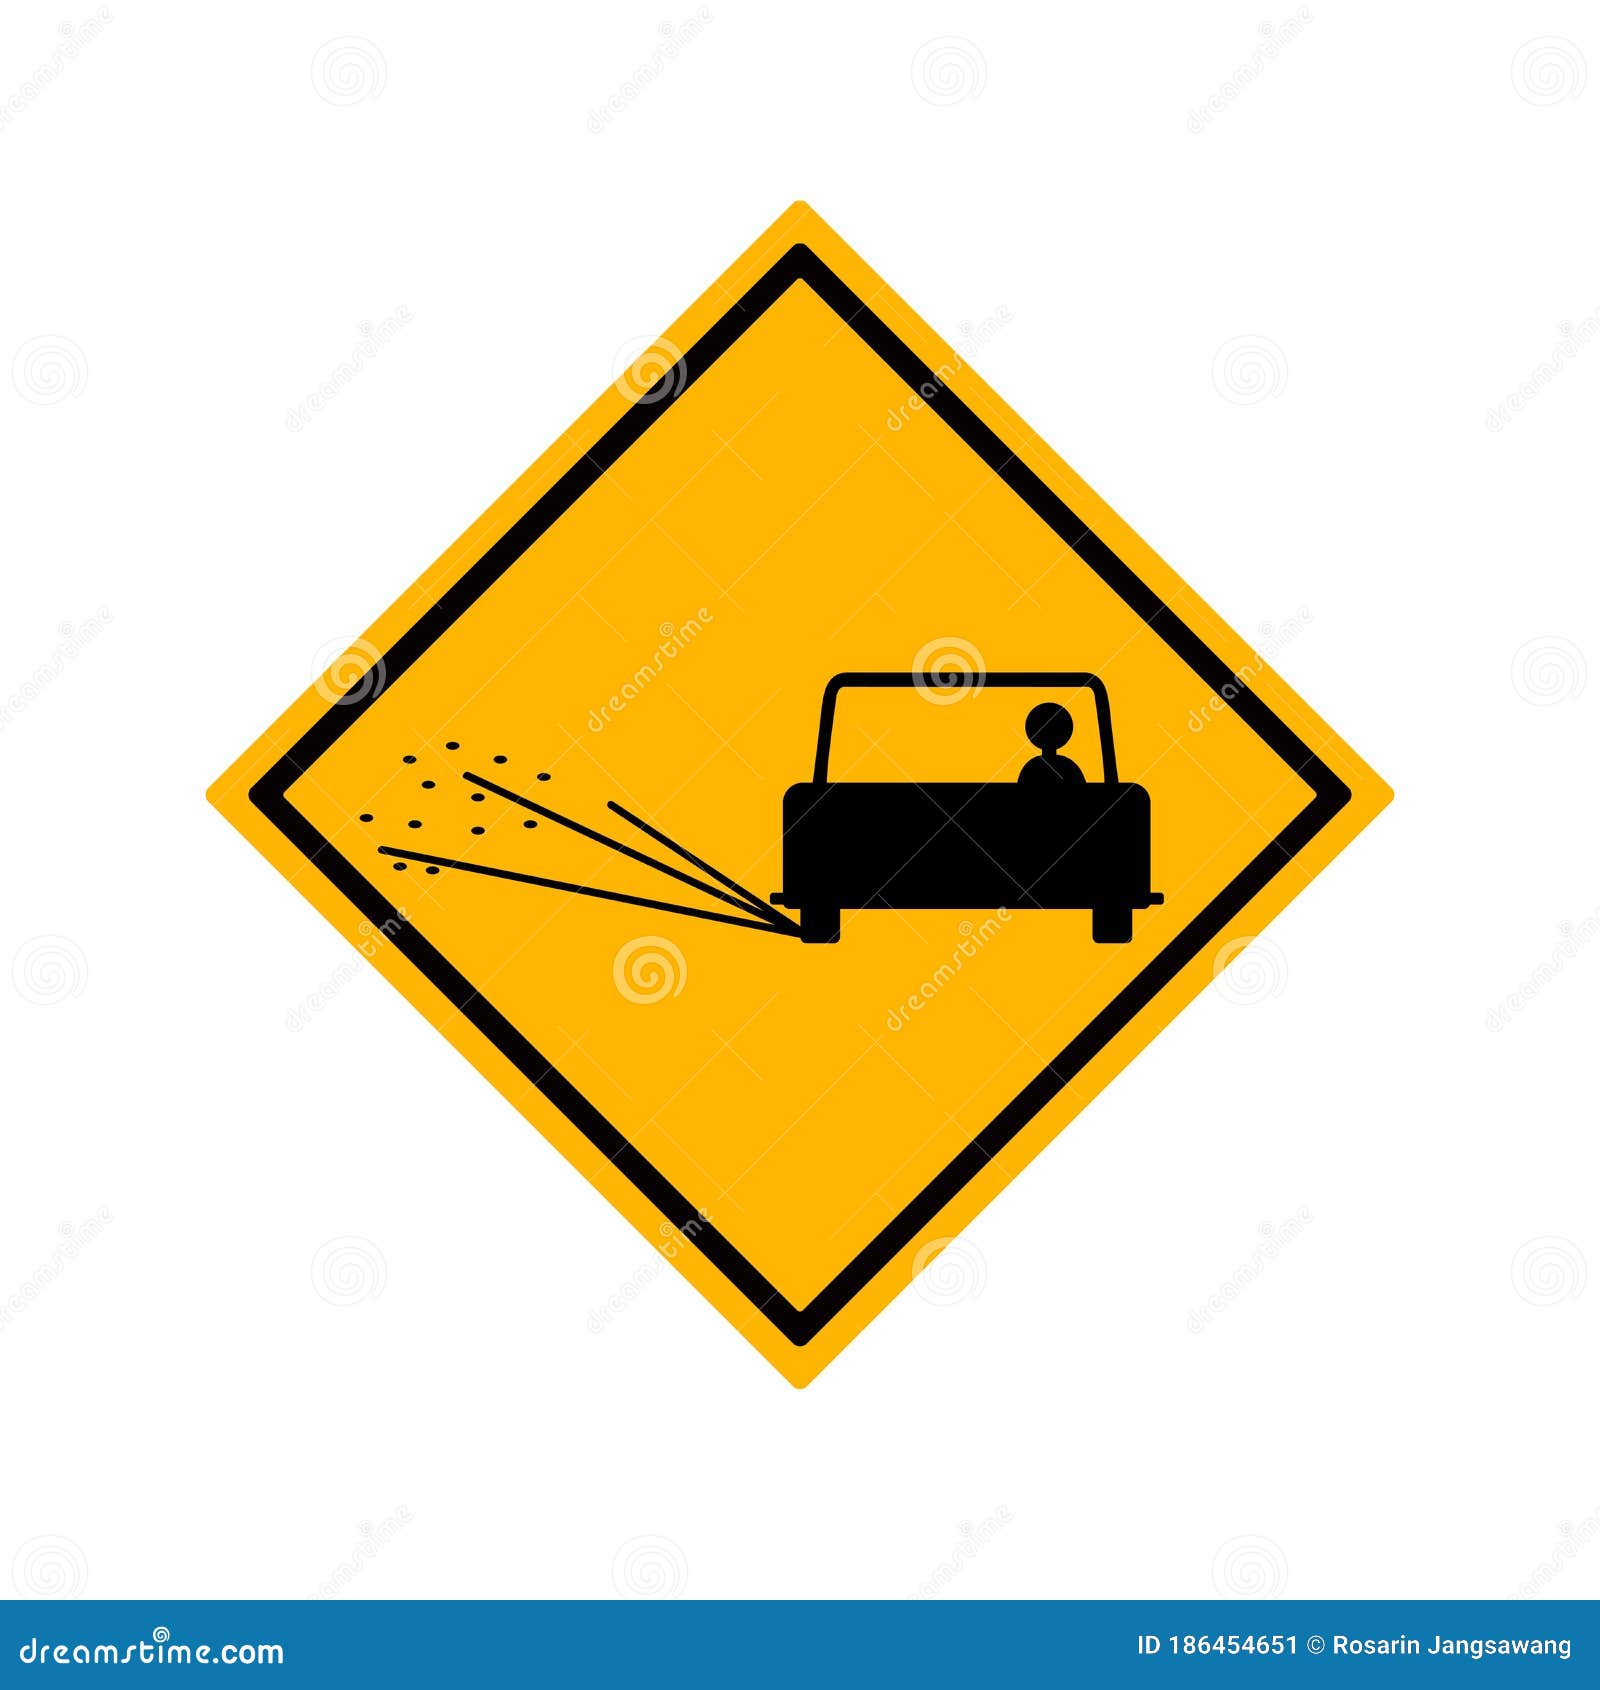 Loose chippings Road safety sign 